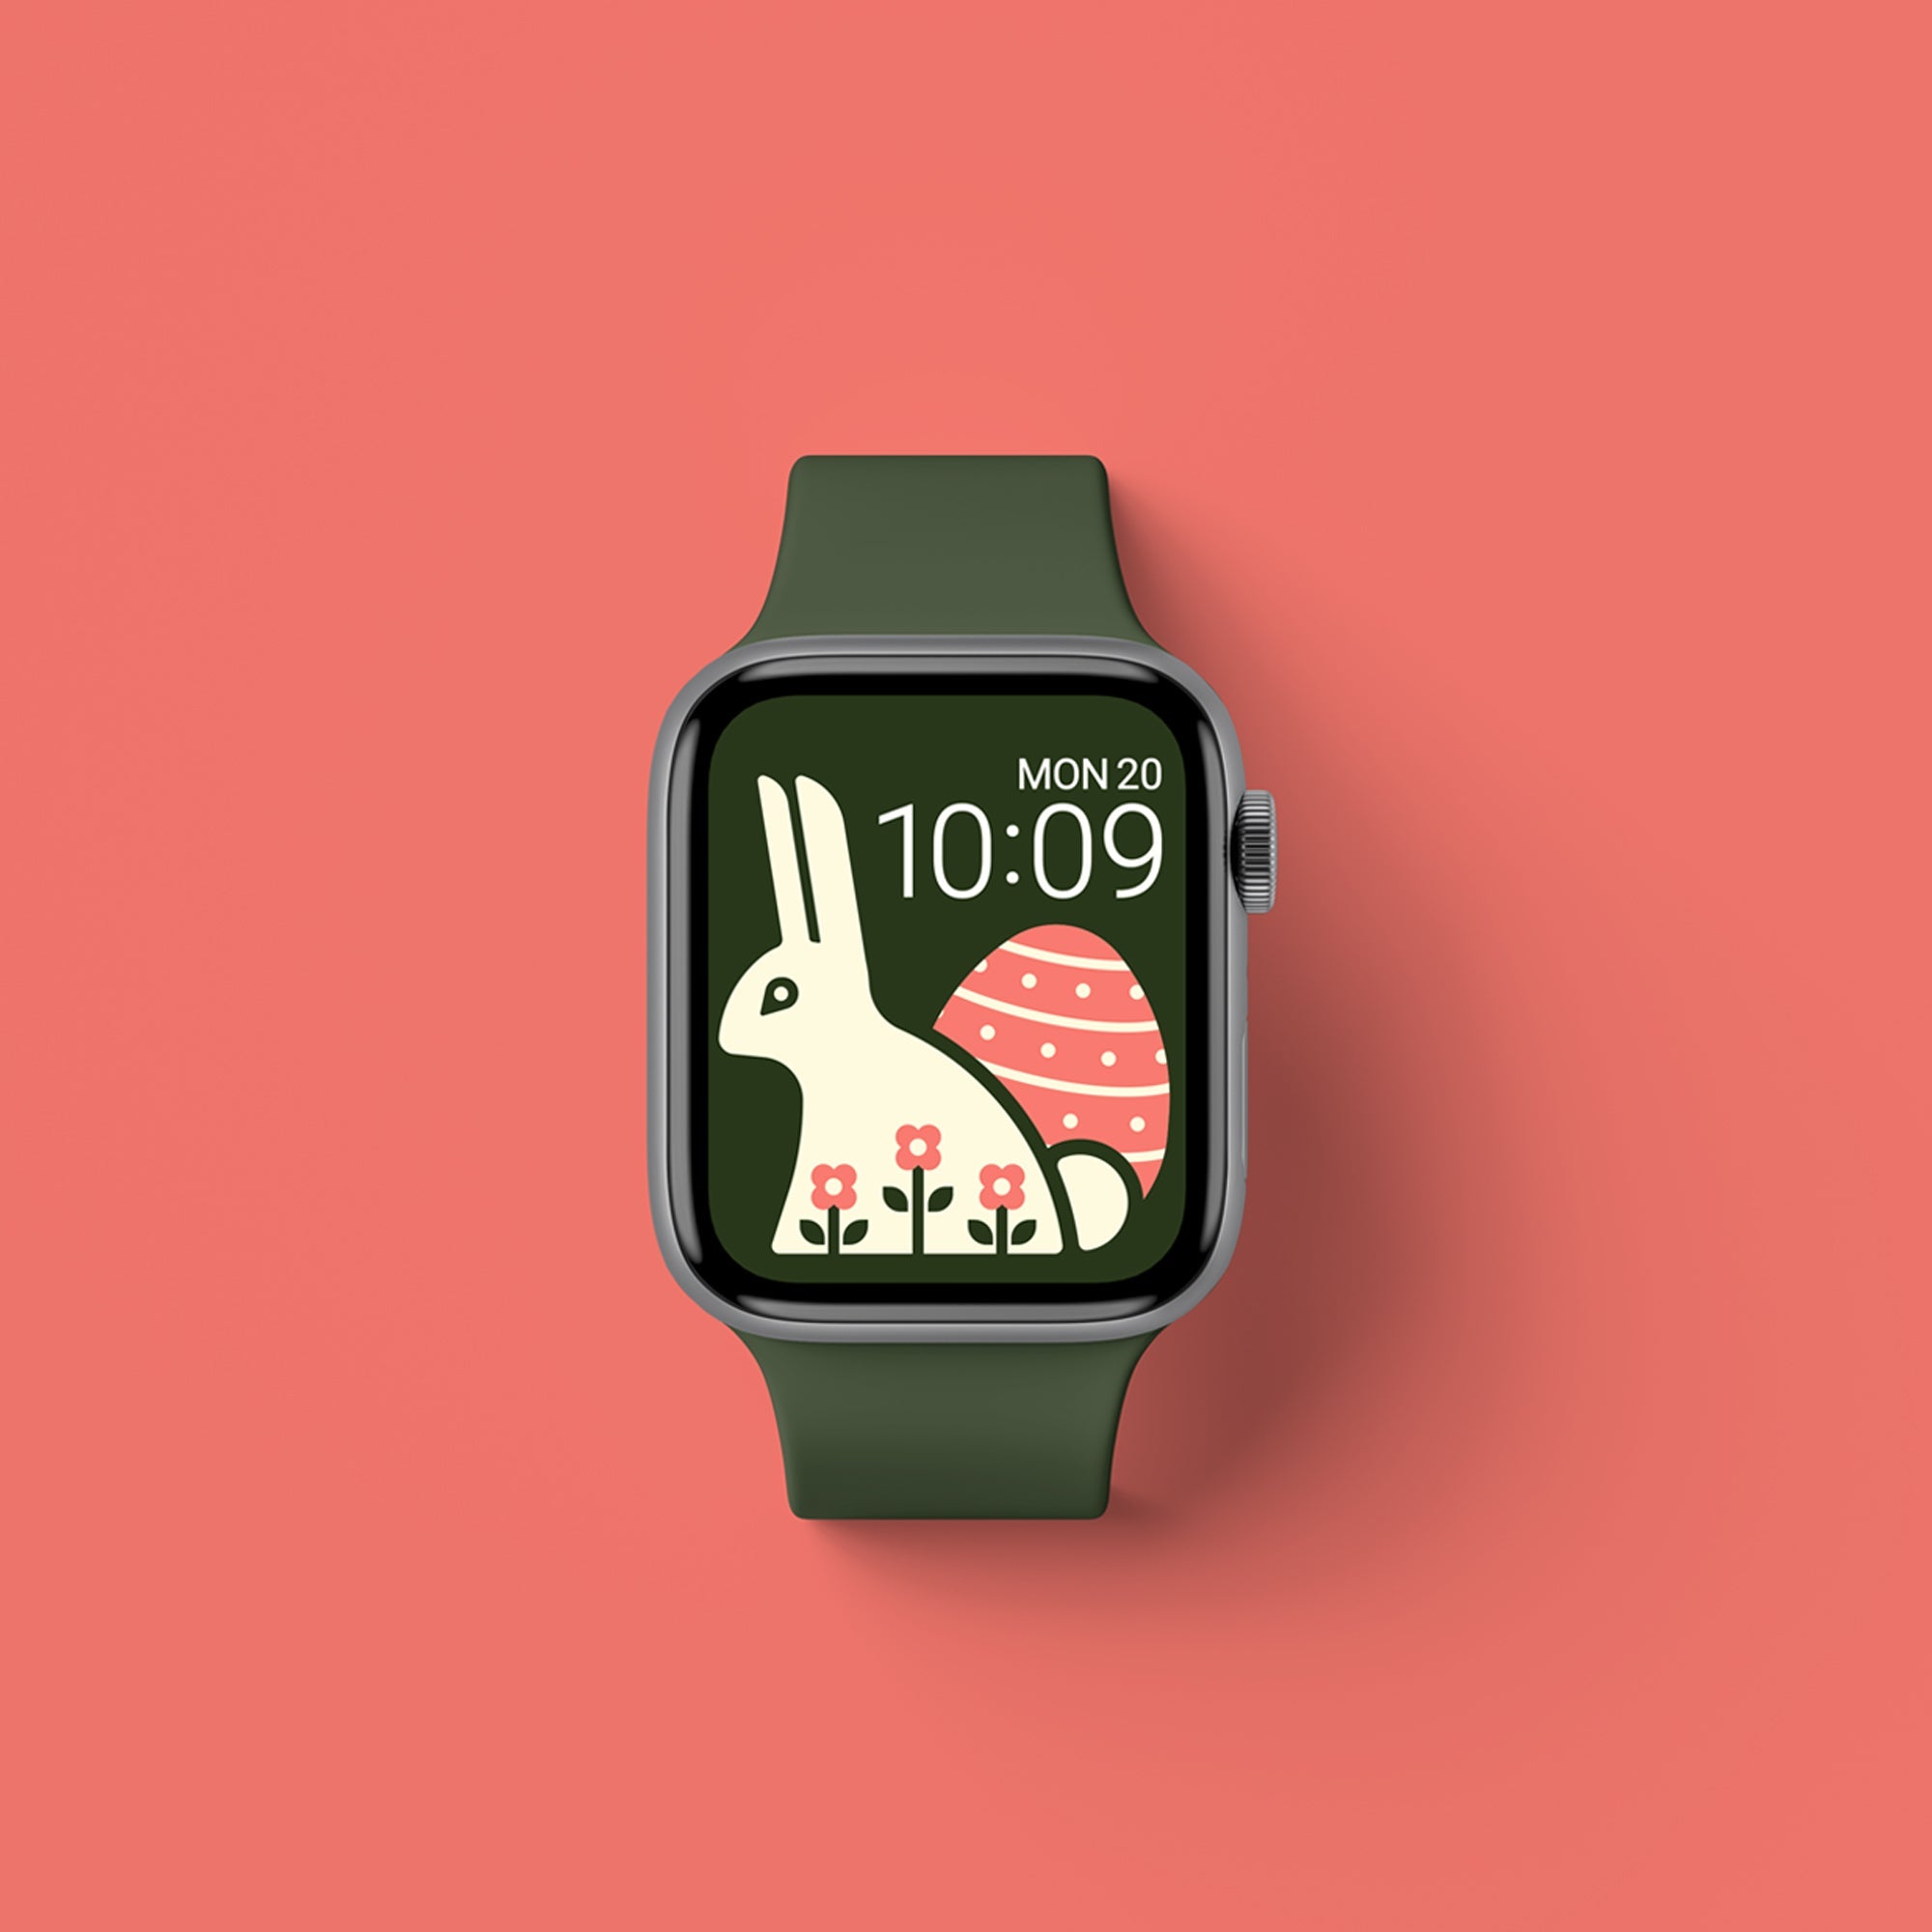 Wallpapers of the Month| March | Apple Watch Wallpapers - 4 Pack - Buckle and Band -